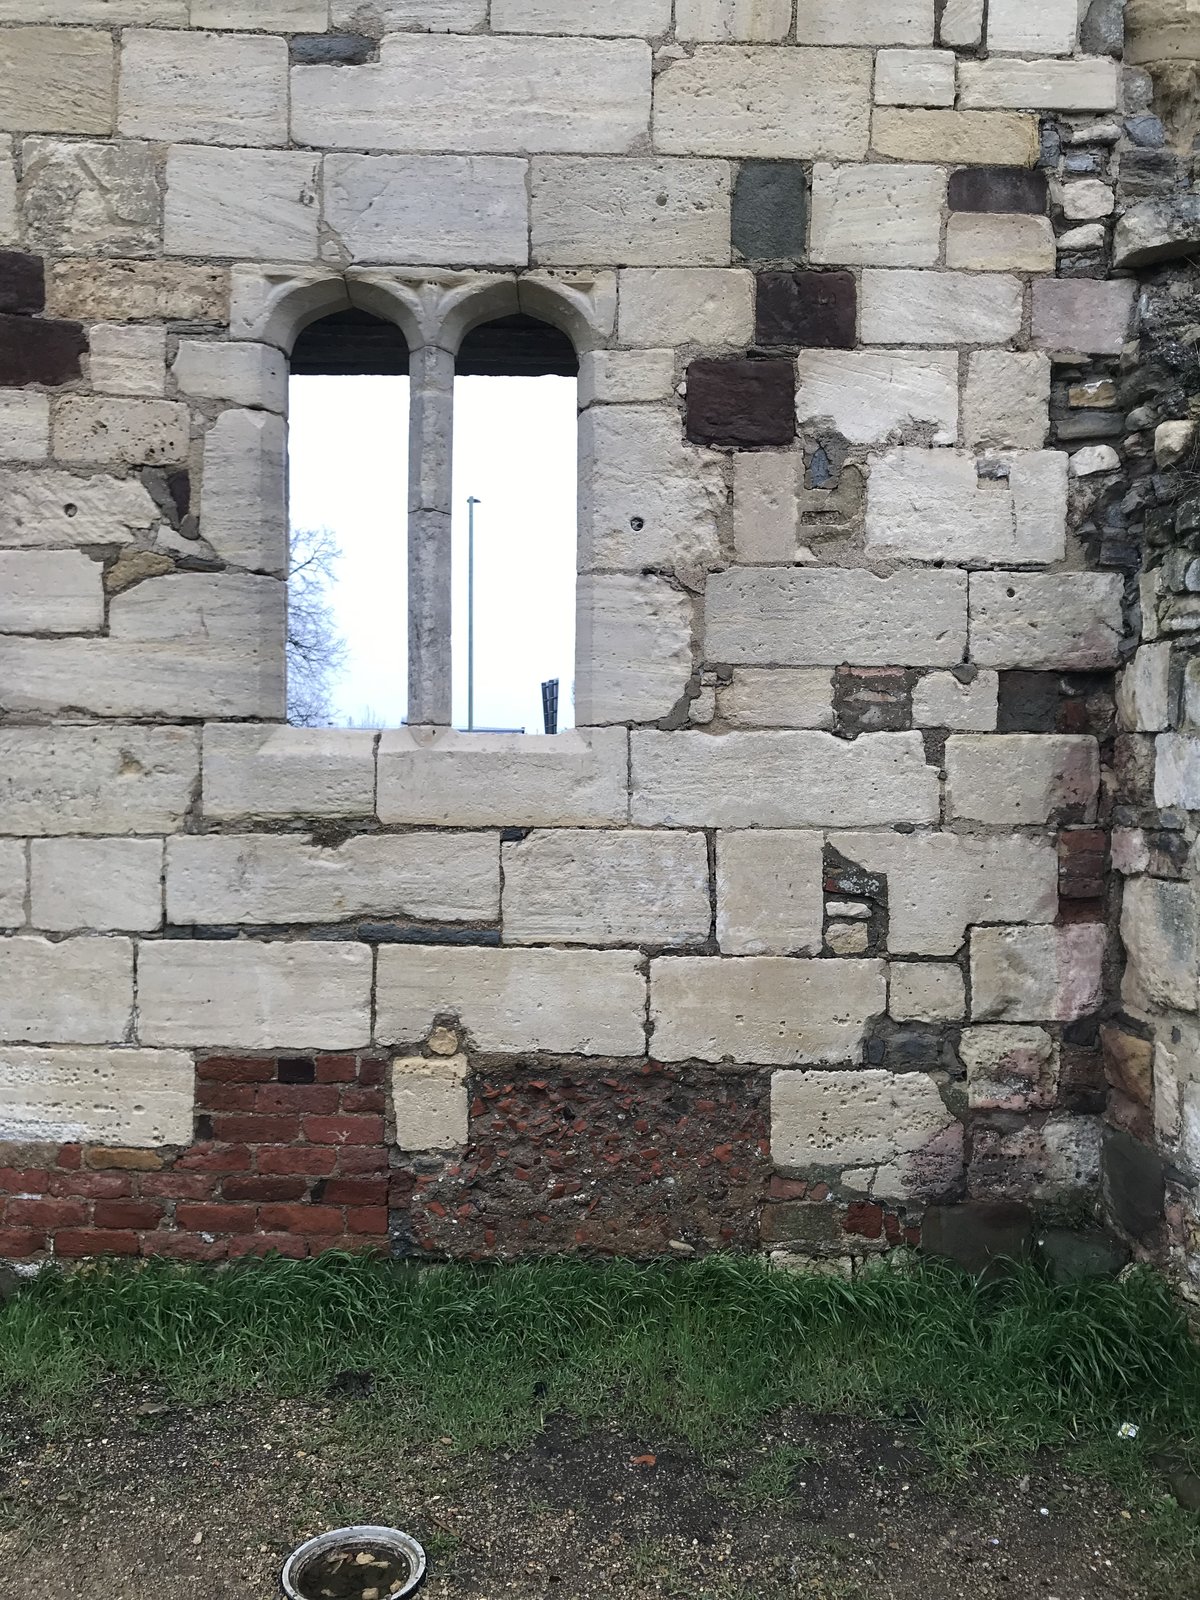 An image of cadw historic site sandblasting graffiti removal after 001 goes here.